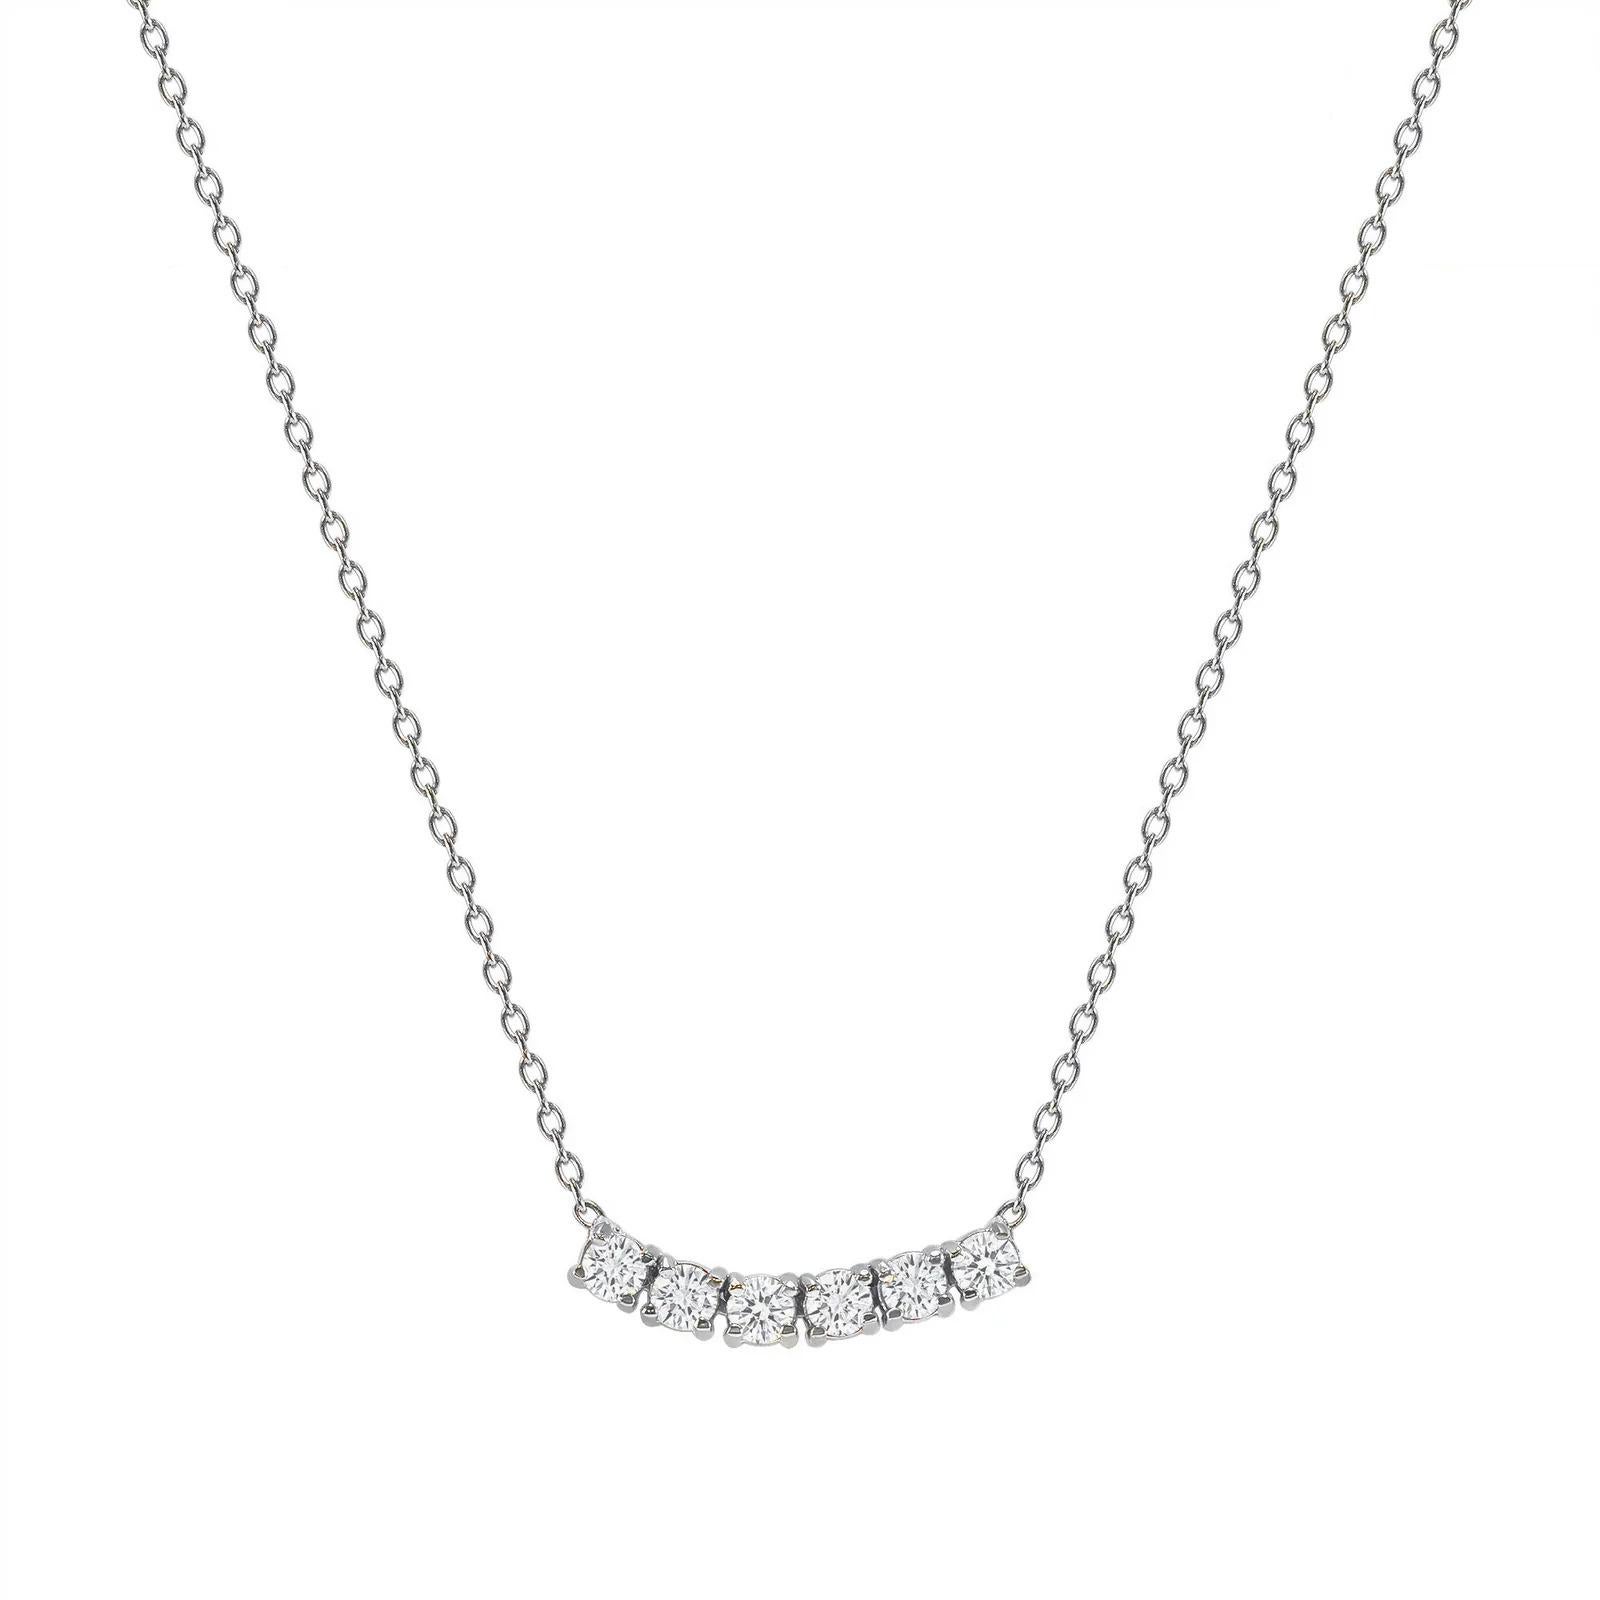 This petite, curved diamond necklace is crafted with gorgeous 14k gold set with six round diamonds.  

Gold: 14k 
Diamond Total Carats: 0.75ct
Diamond Cut: Round (6 diamonds)
Diamond Clarity: VS
Diamond Color: F
Color: White Gold
Necklace Length: 22